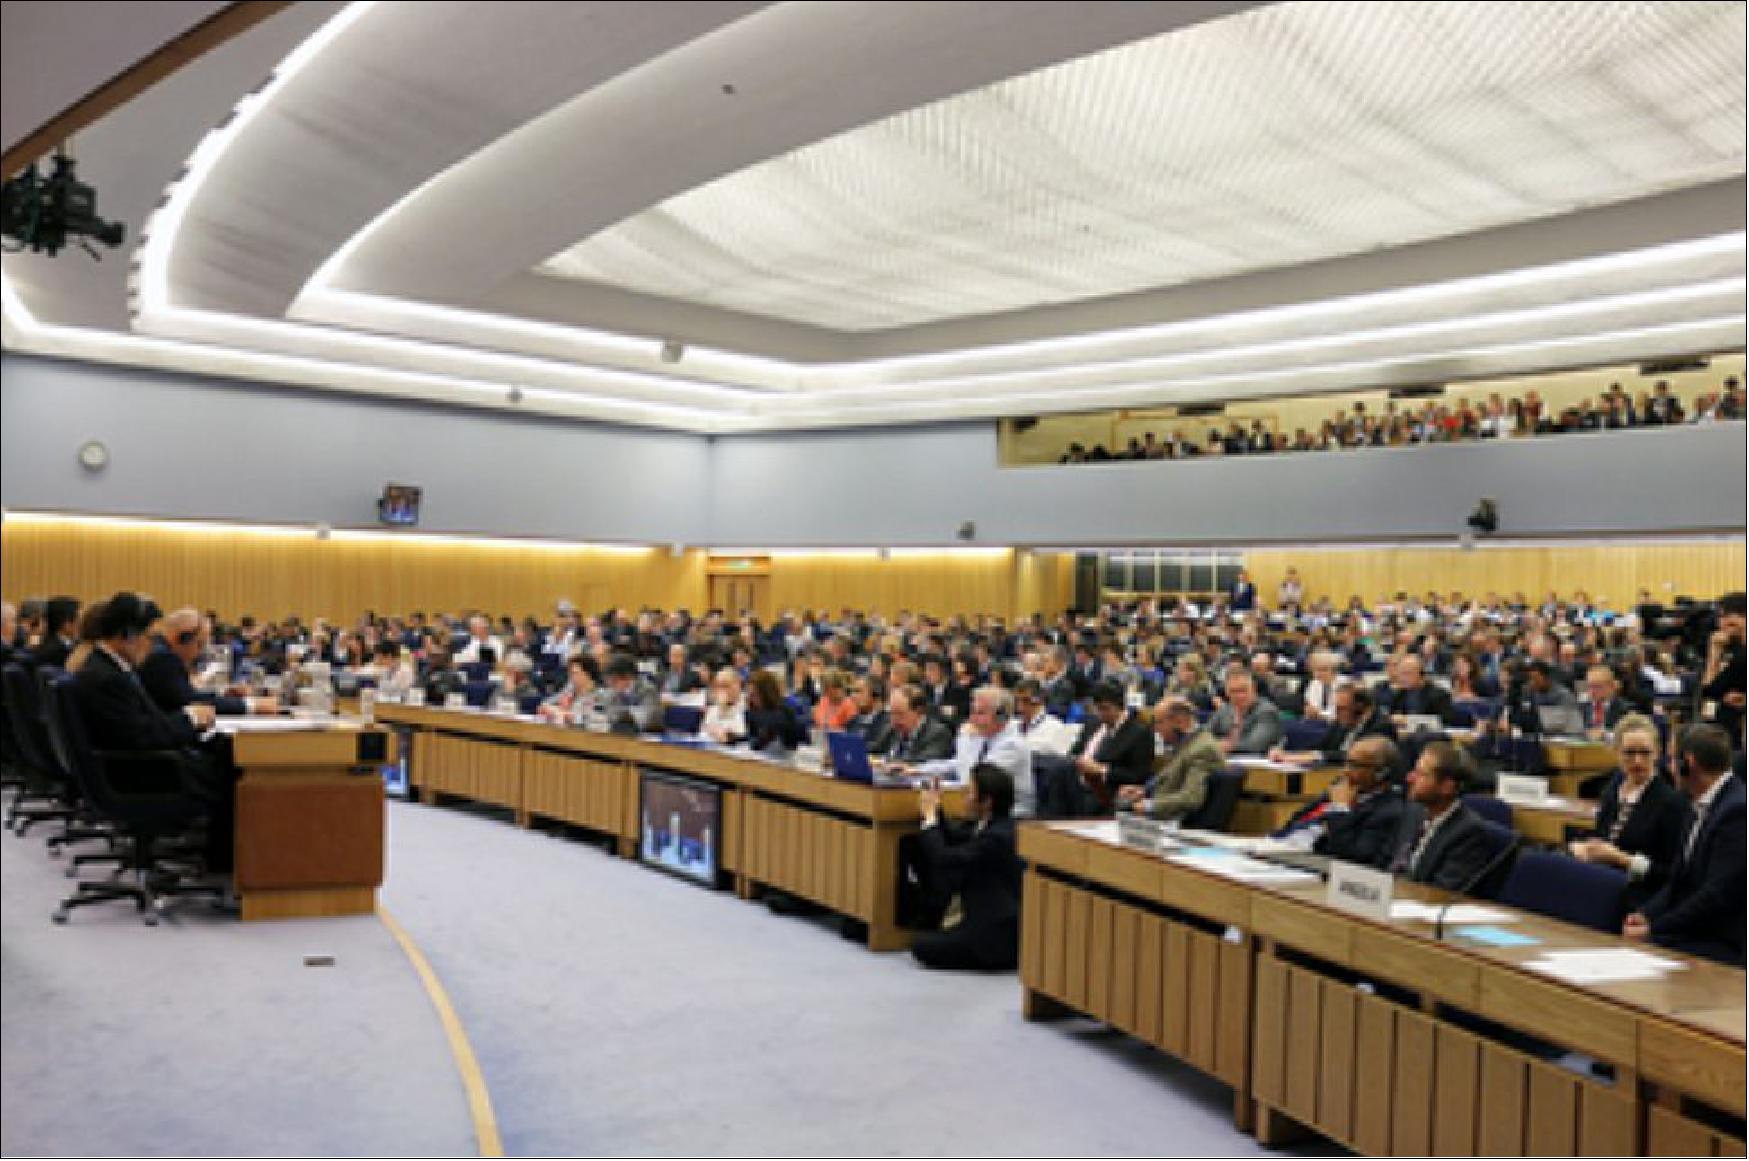 Figure 150: The initial GHG strategy was adopted by IMO’s Marine Environment Protection Committee (MEPC), during its 72nd session at IMO Headquarters in London, United Kingdom. The meeting was attended by more than 100 IMO Member States (image credit: IMO)